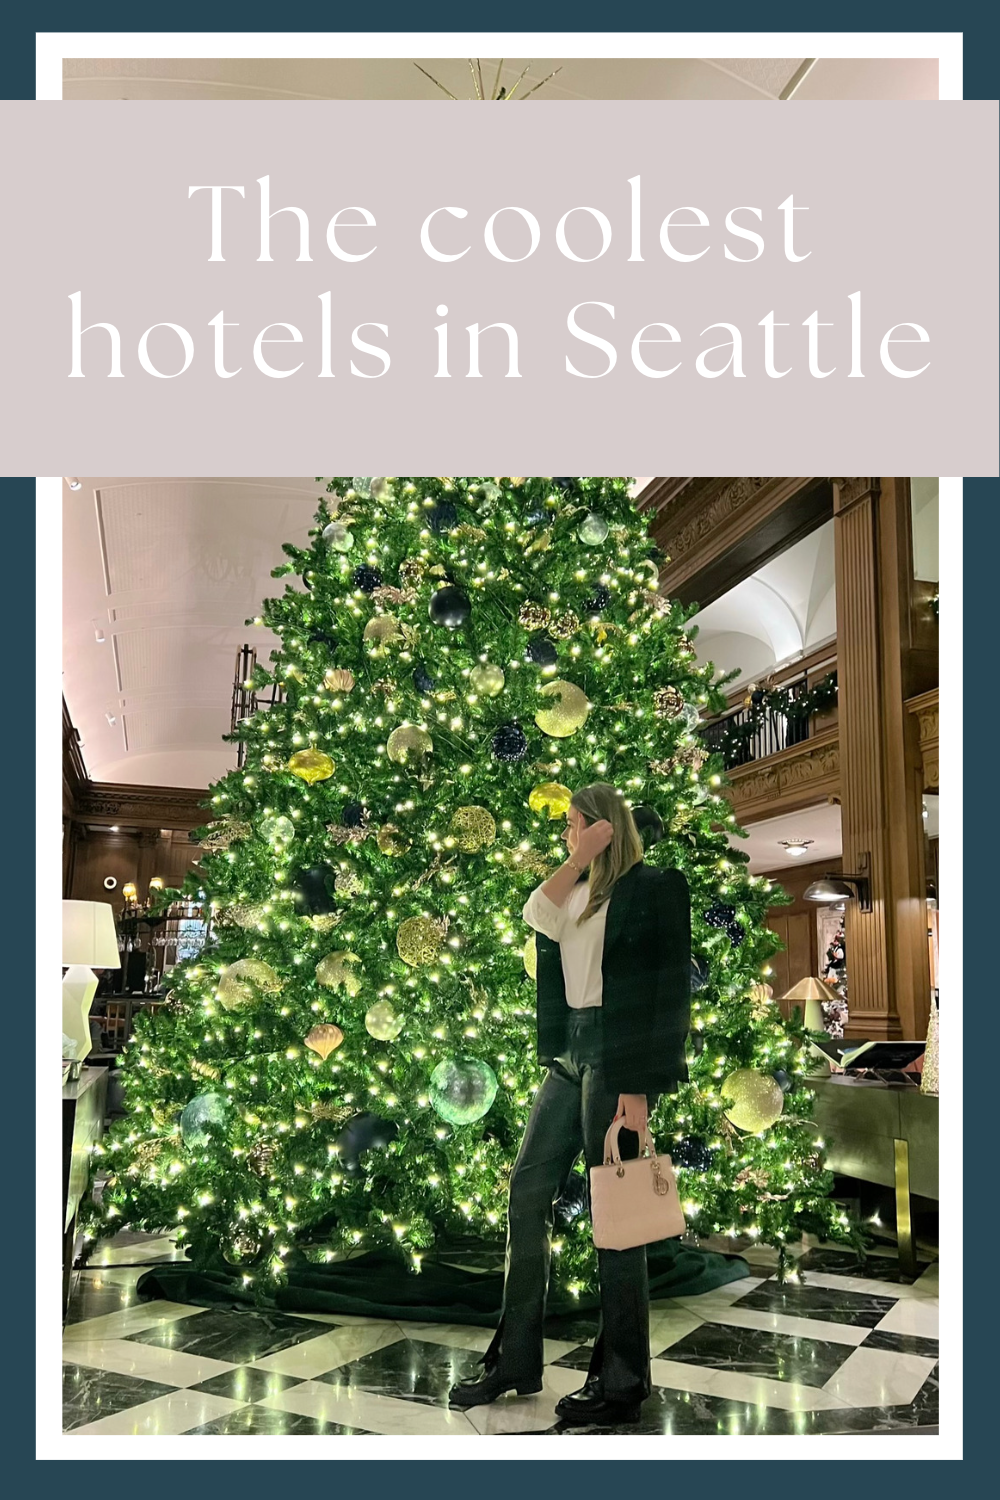 Coolest hotels in Seattle by My Next Pin